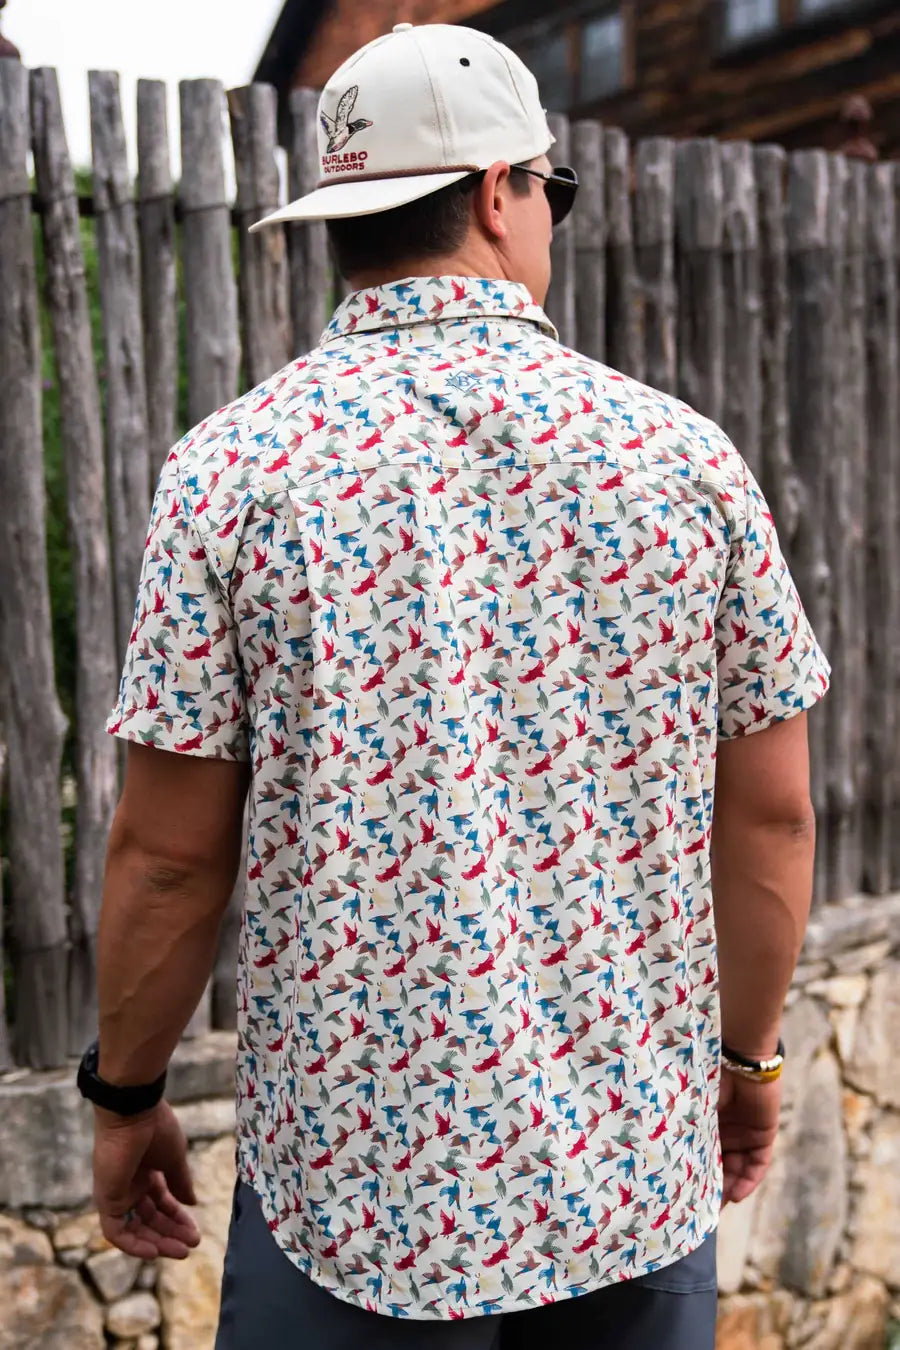 back view of male model wearing a patterned shirt